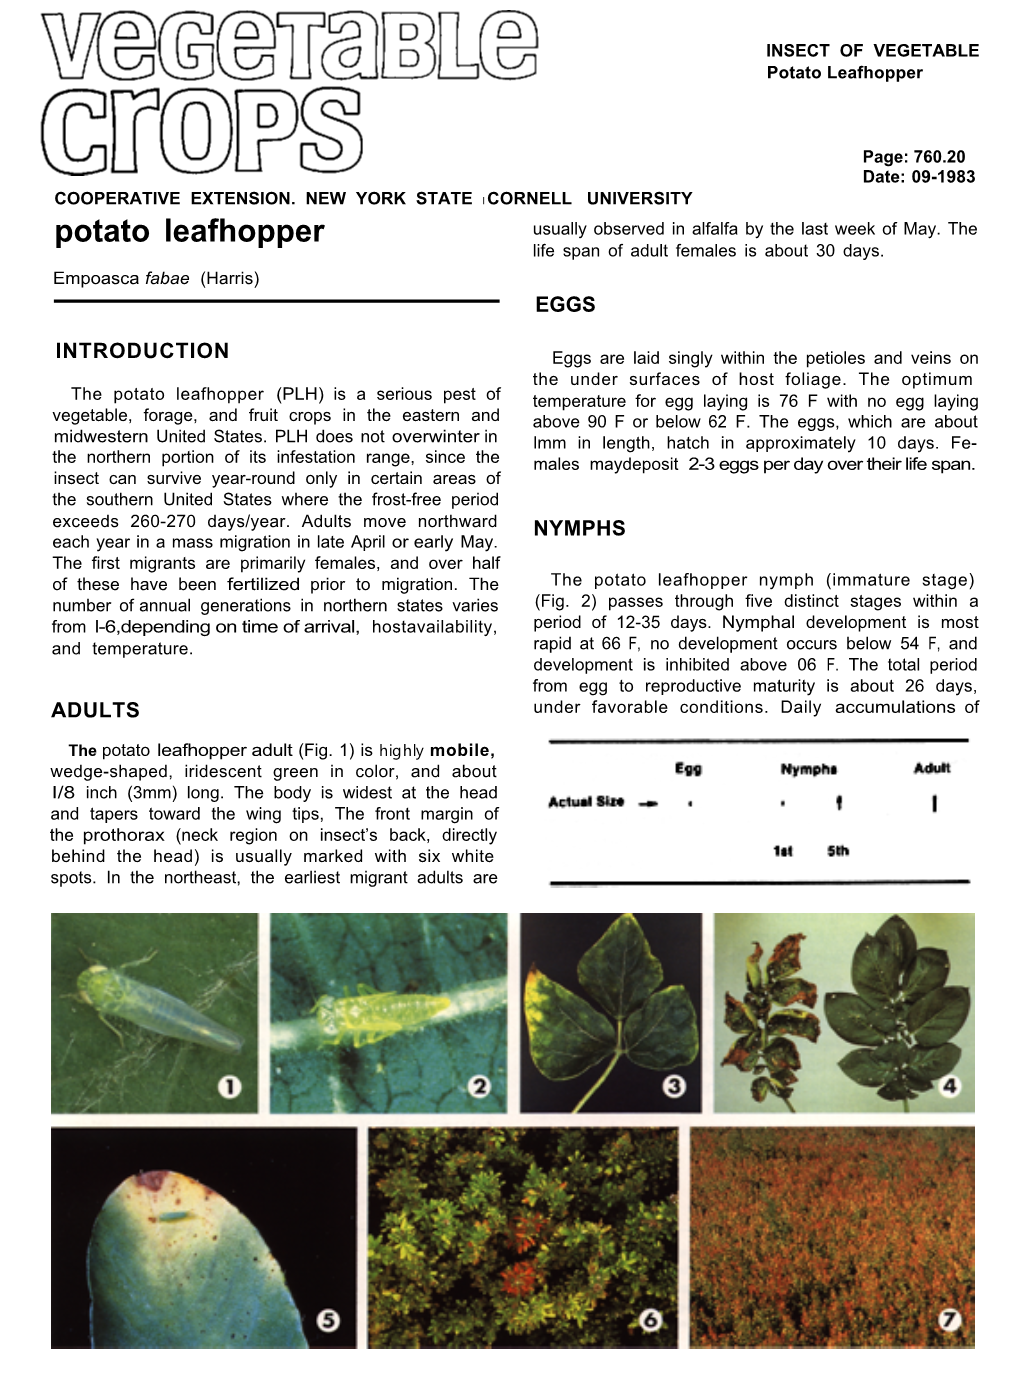 Insects of Vegetables: Potato Leafhopper